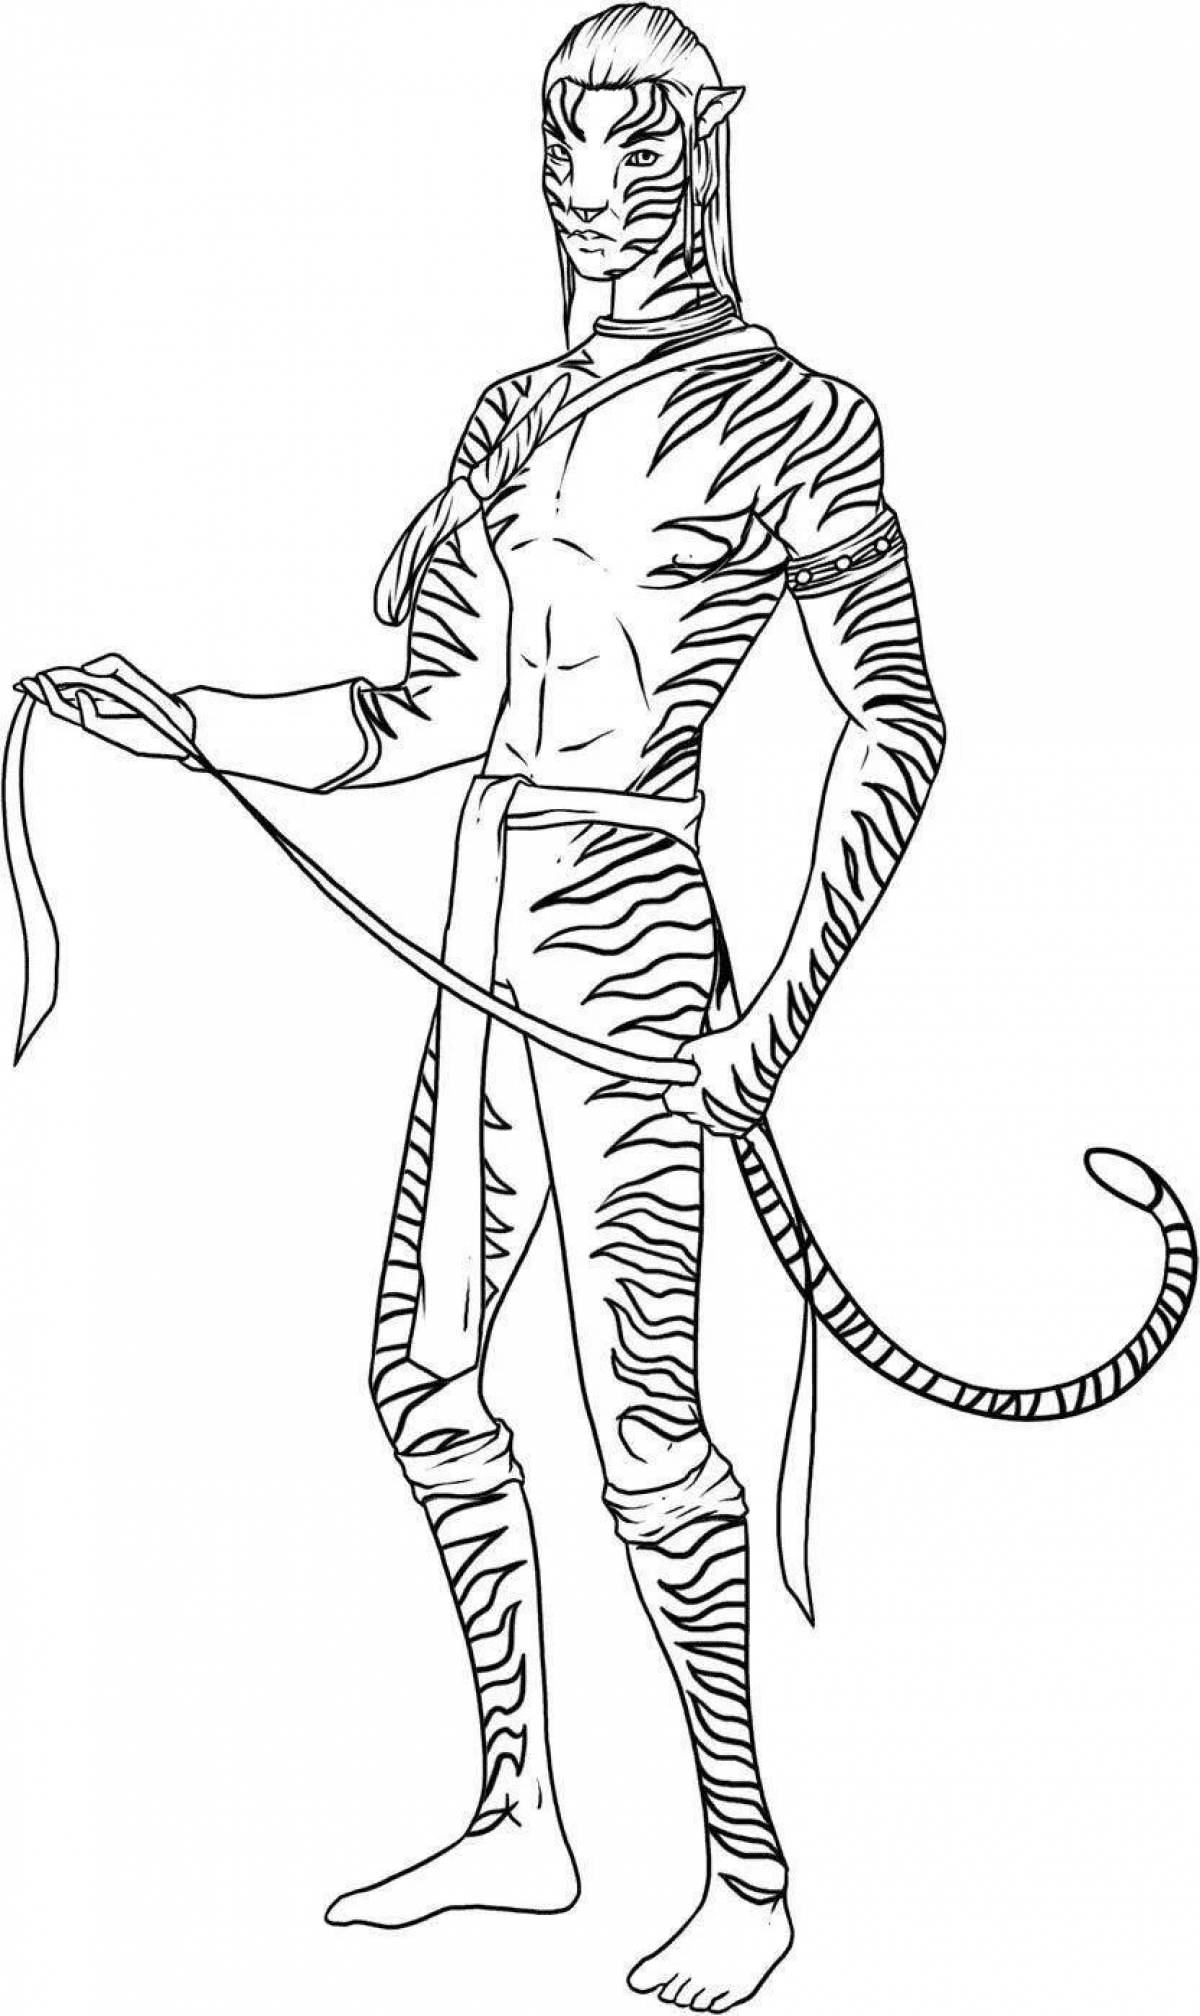 Colorful avatar coloring page for kids